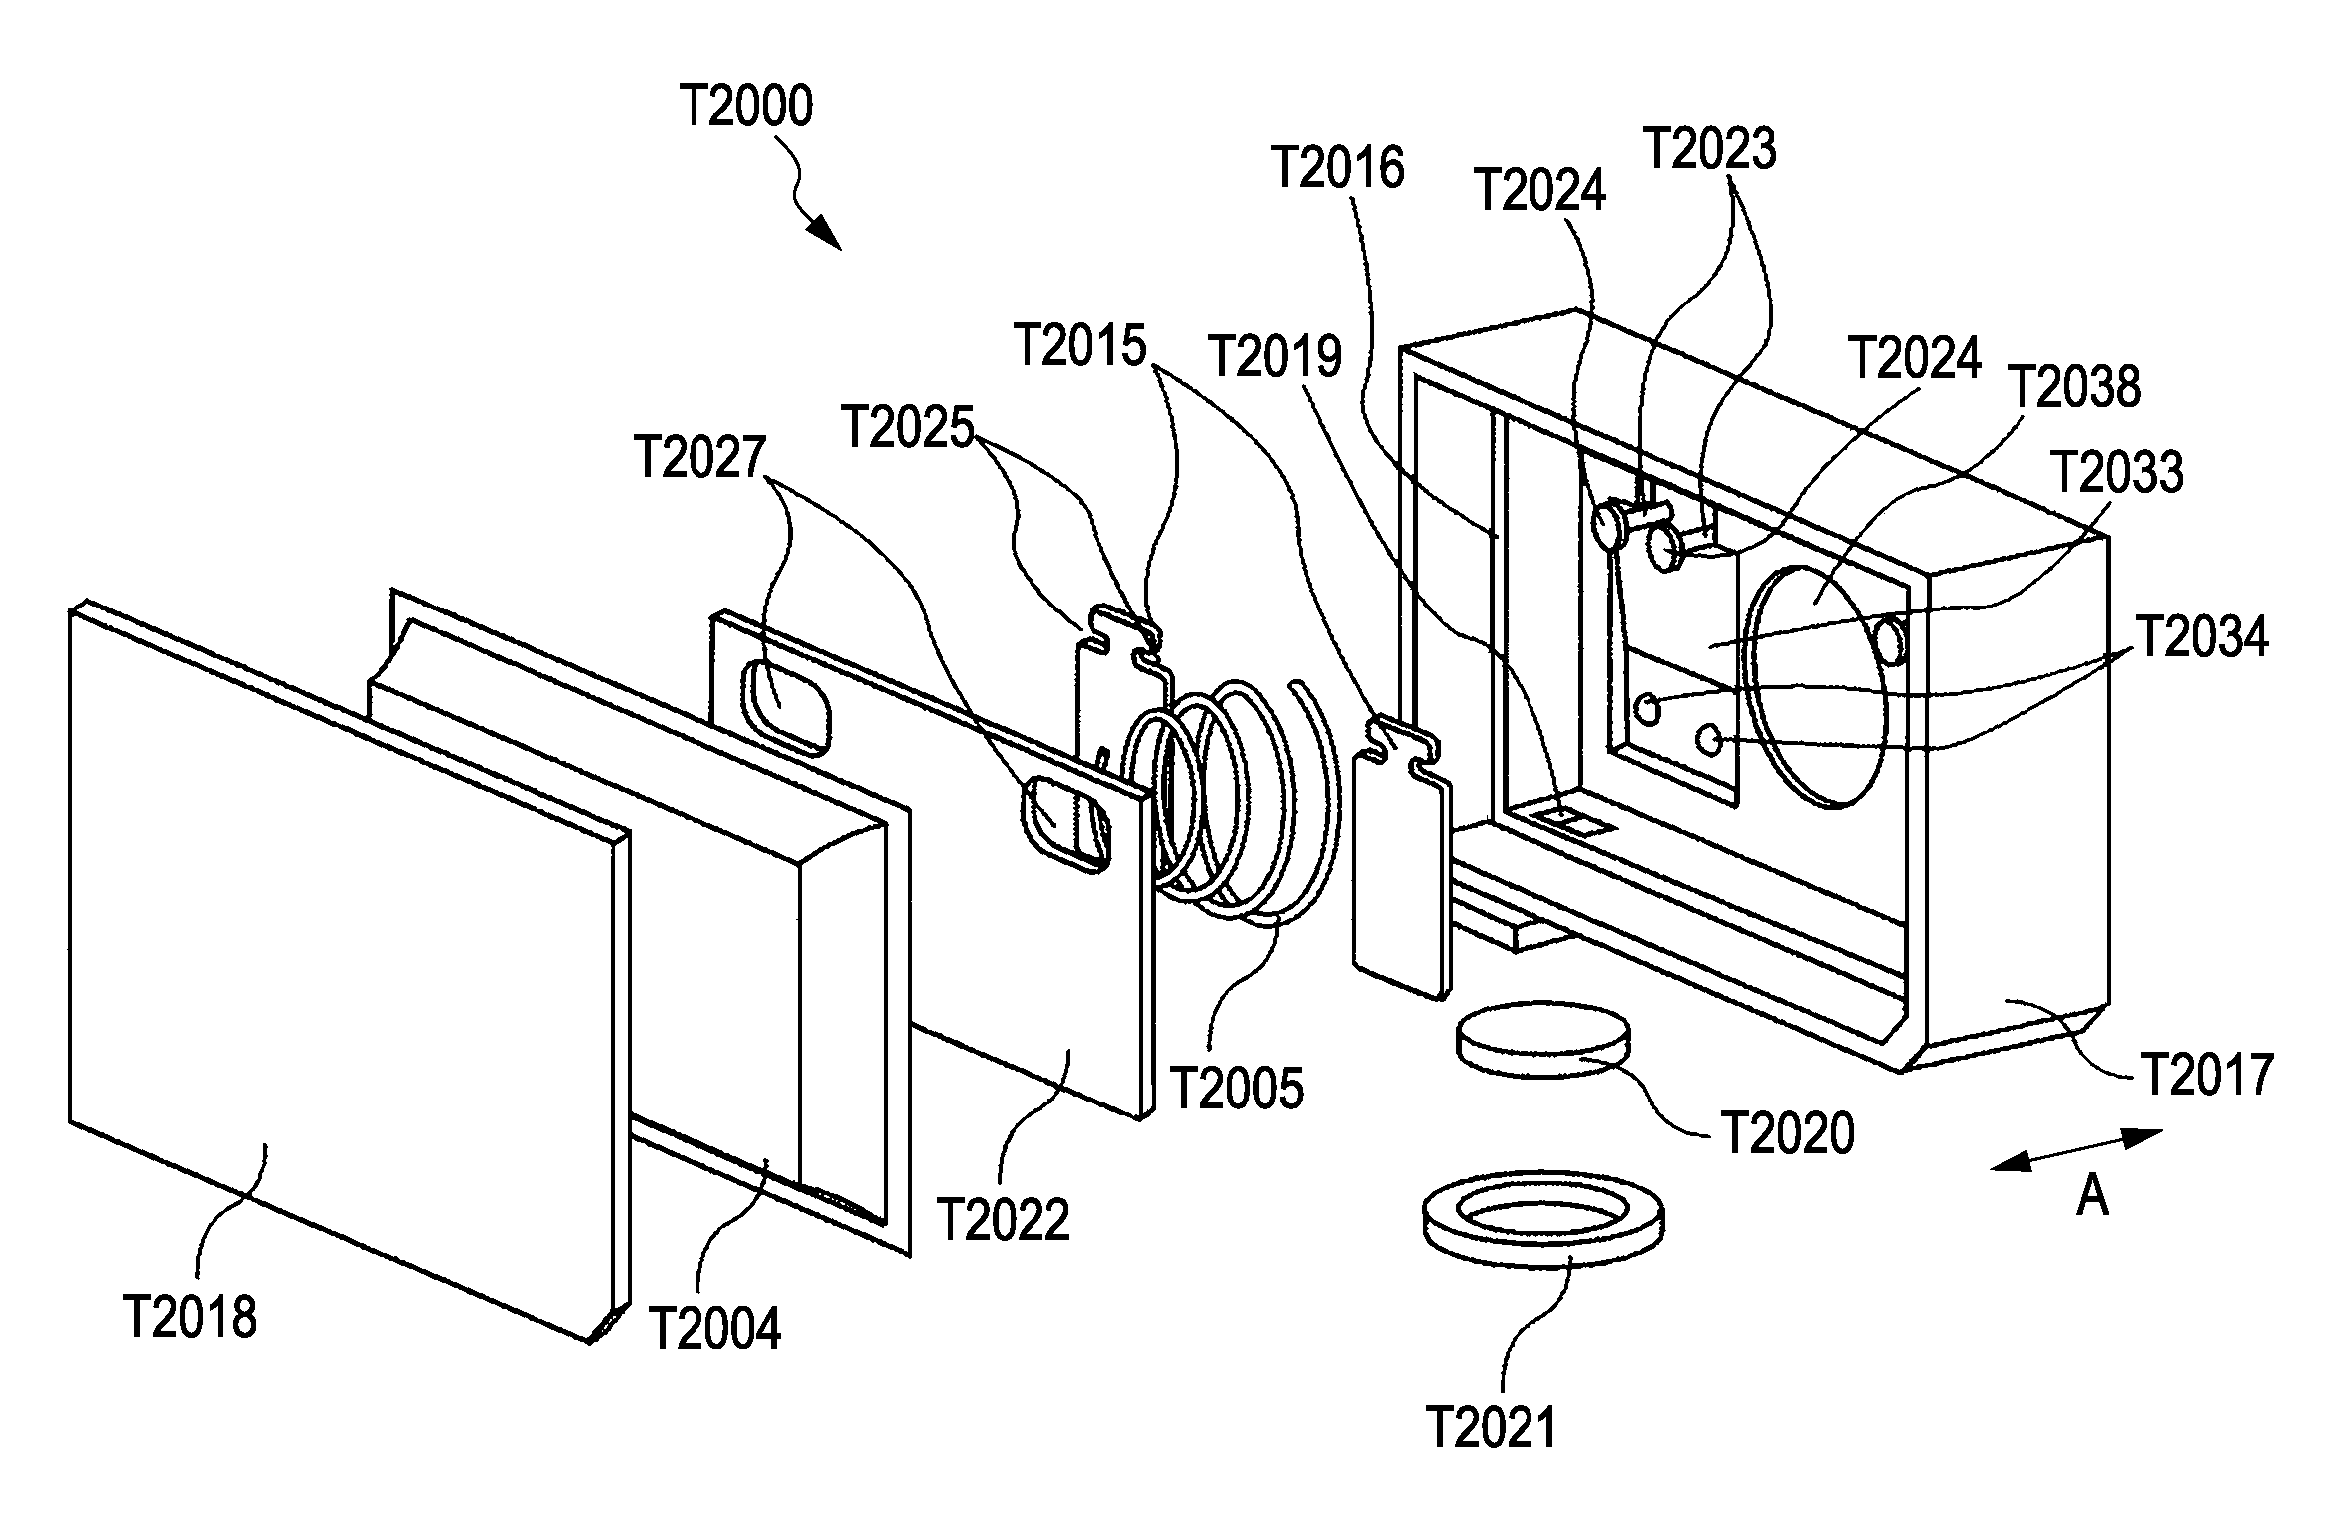 Ink tank and recording apparatus